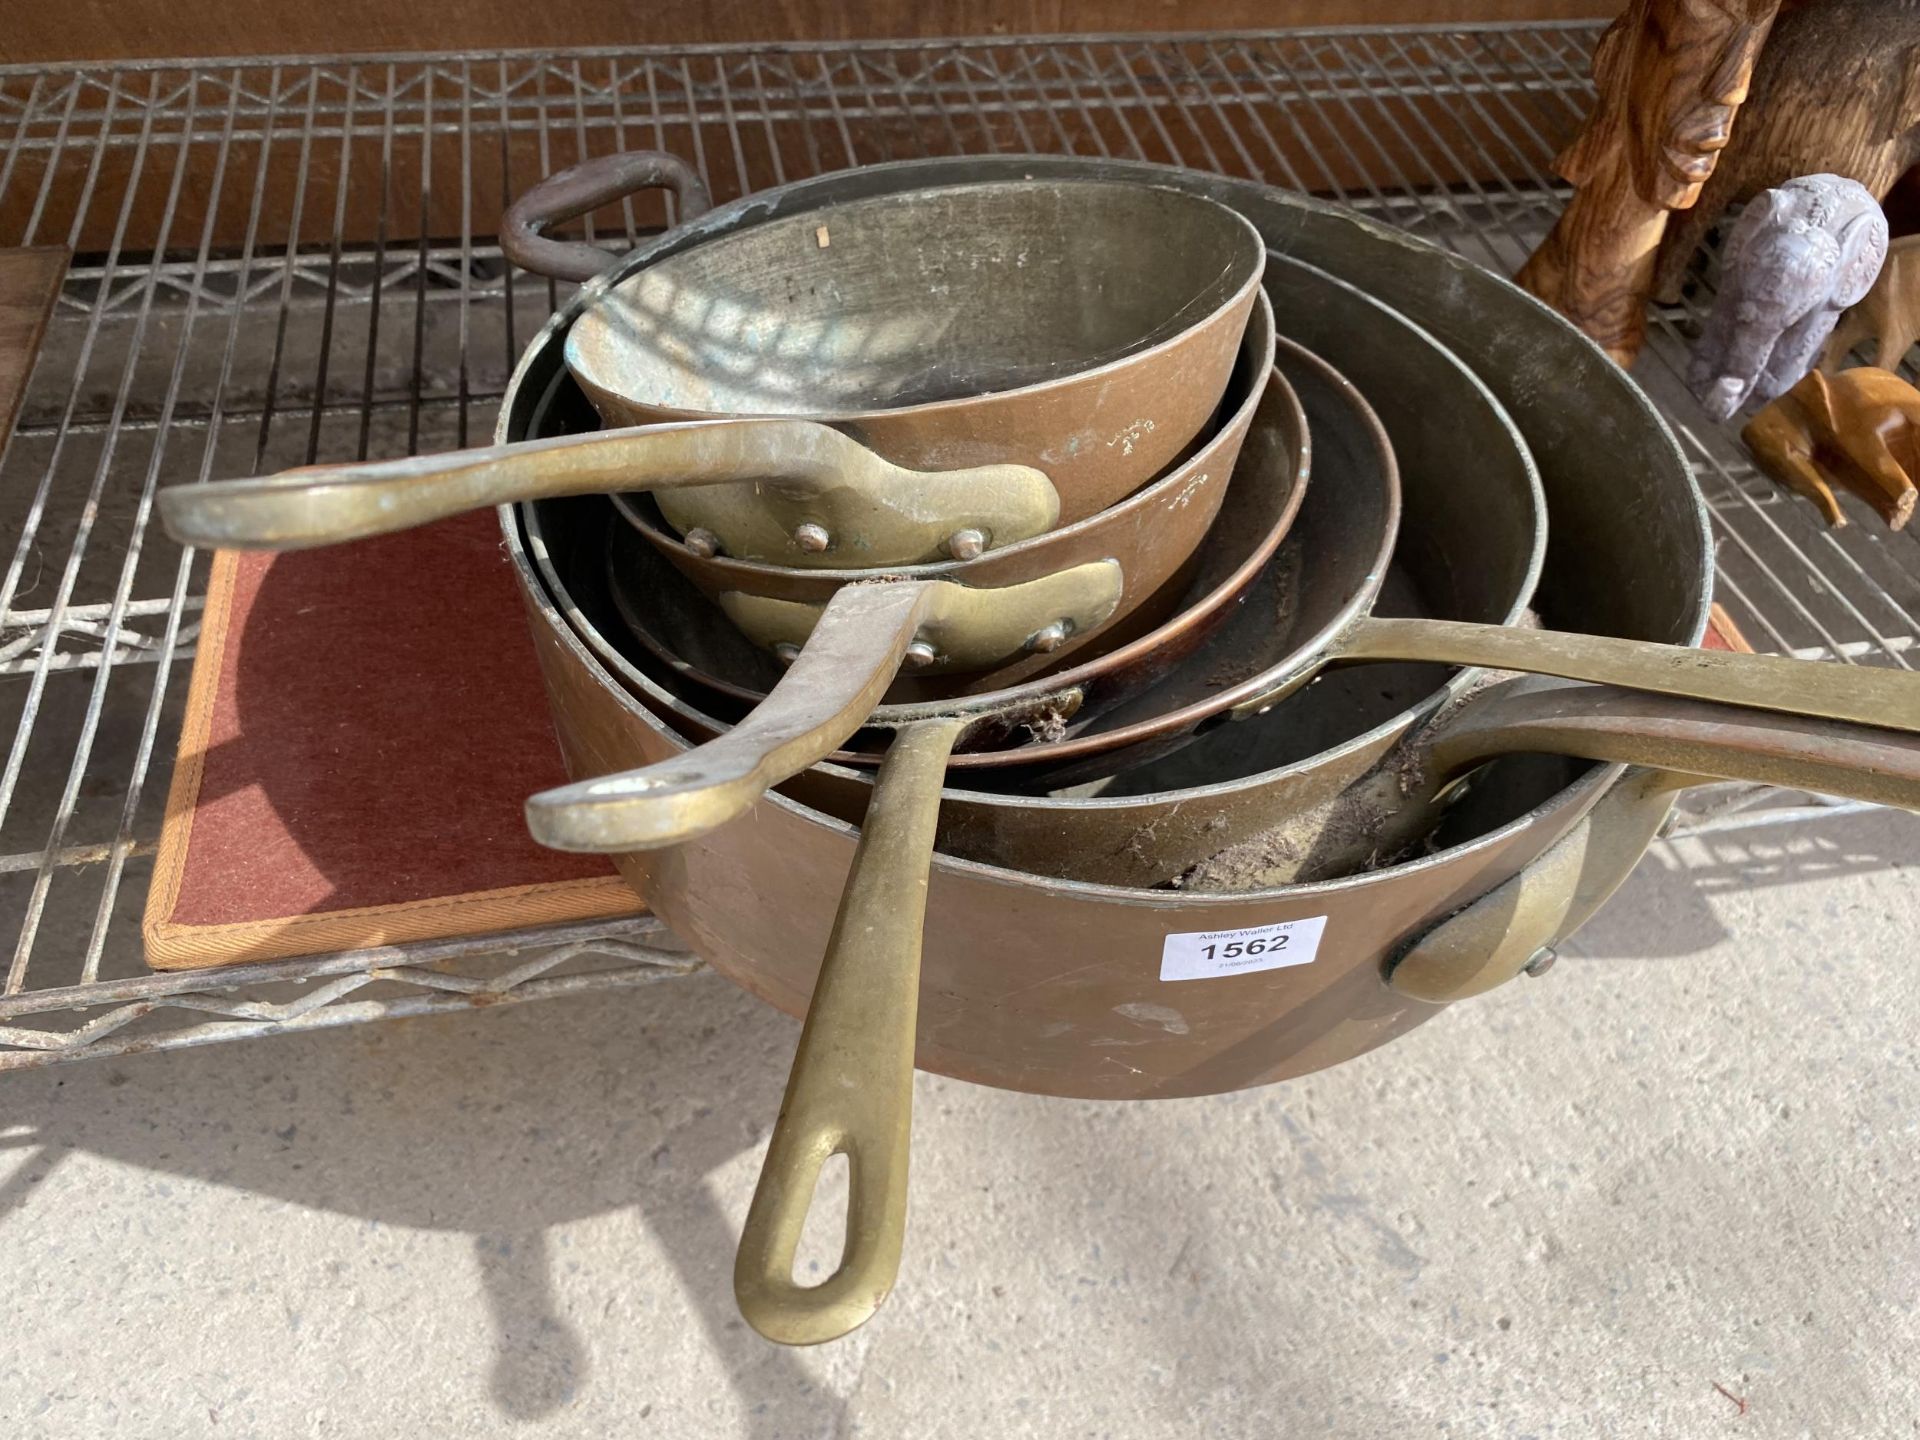 SIX VINTAGE BRASS AND COPPER COOKING PANS - Image 2 of 3